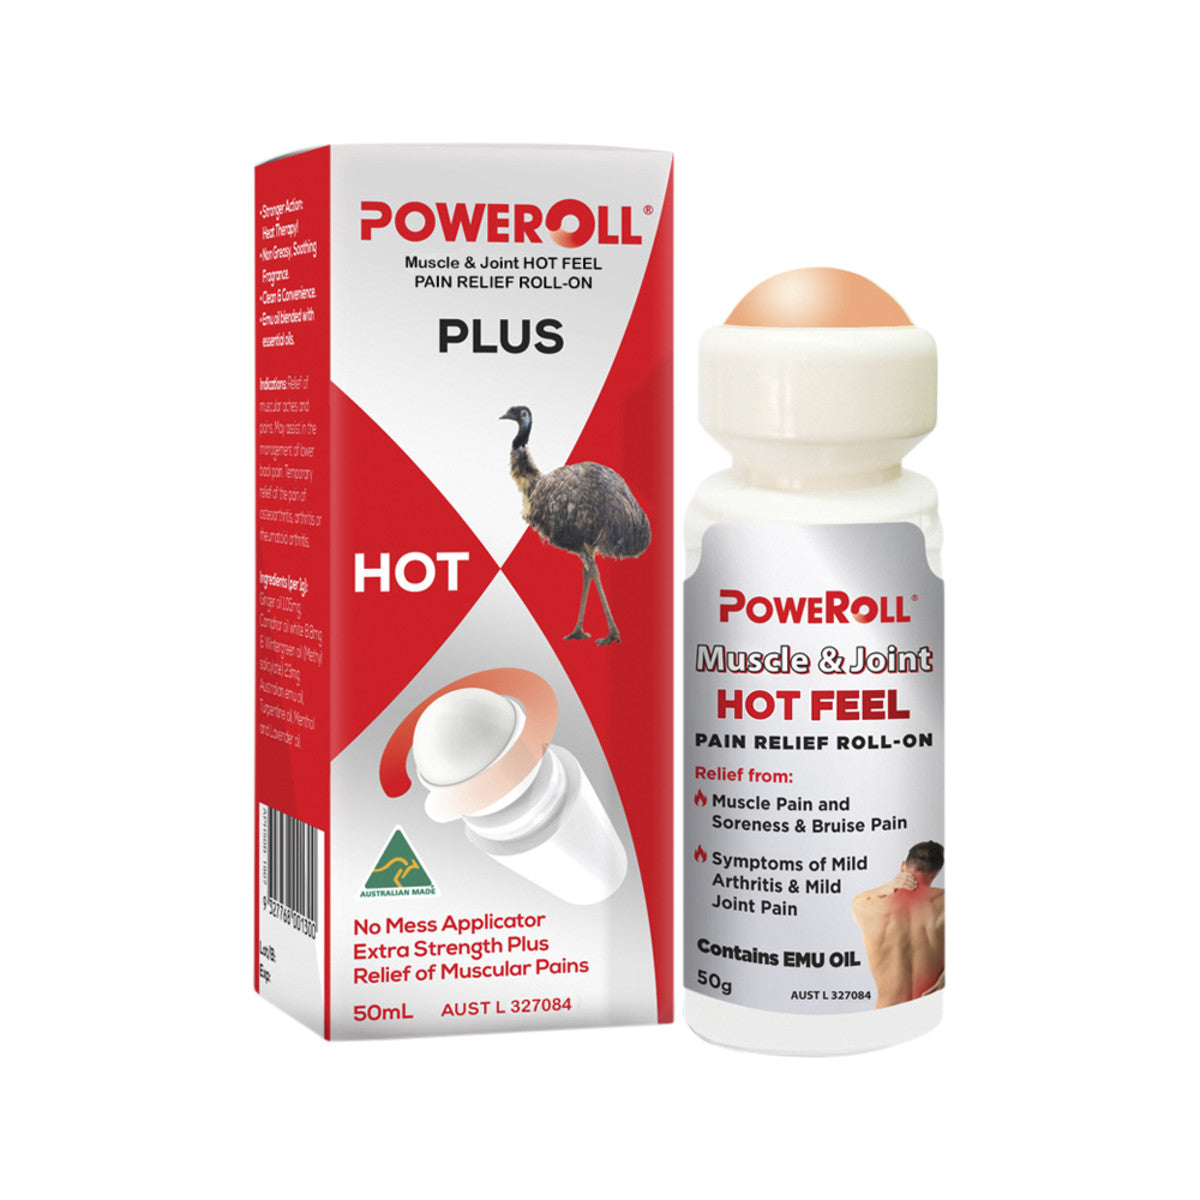 Glimlife - PoweRoll Pain Relief Oil Plus (Hot) Roll On